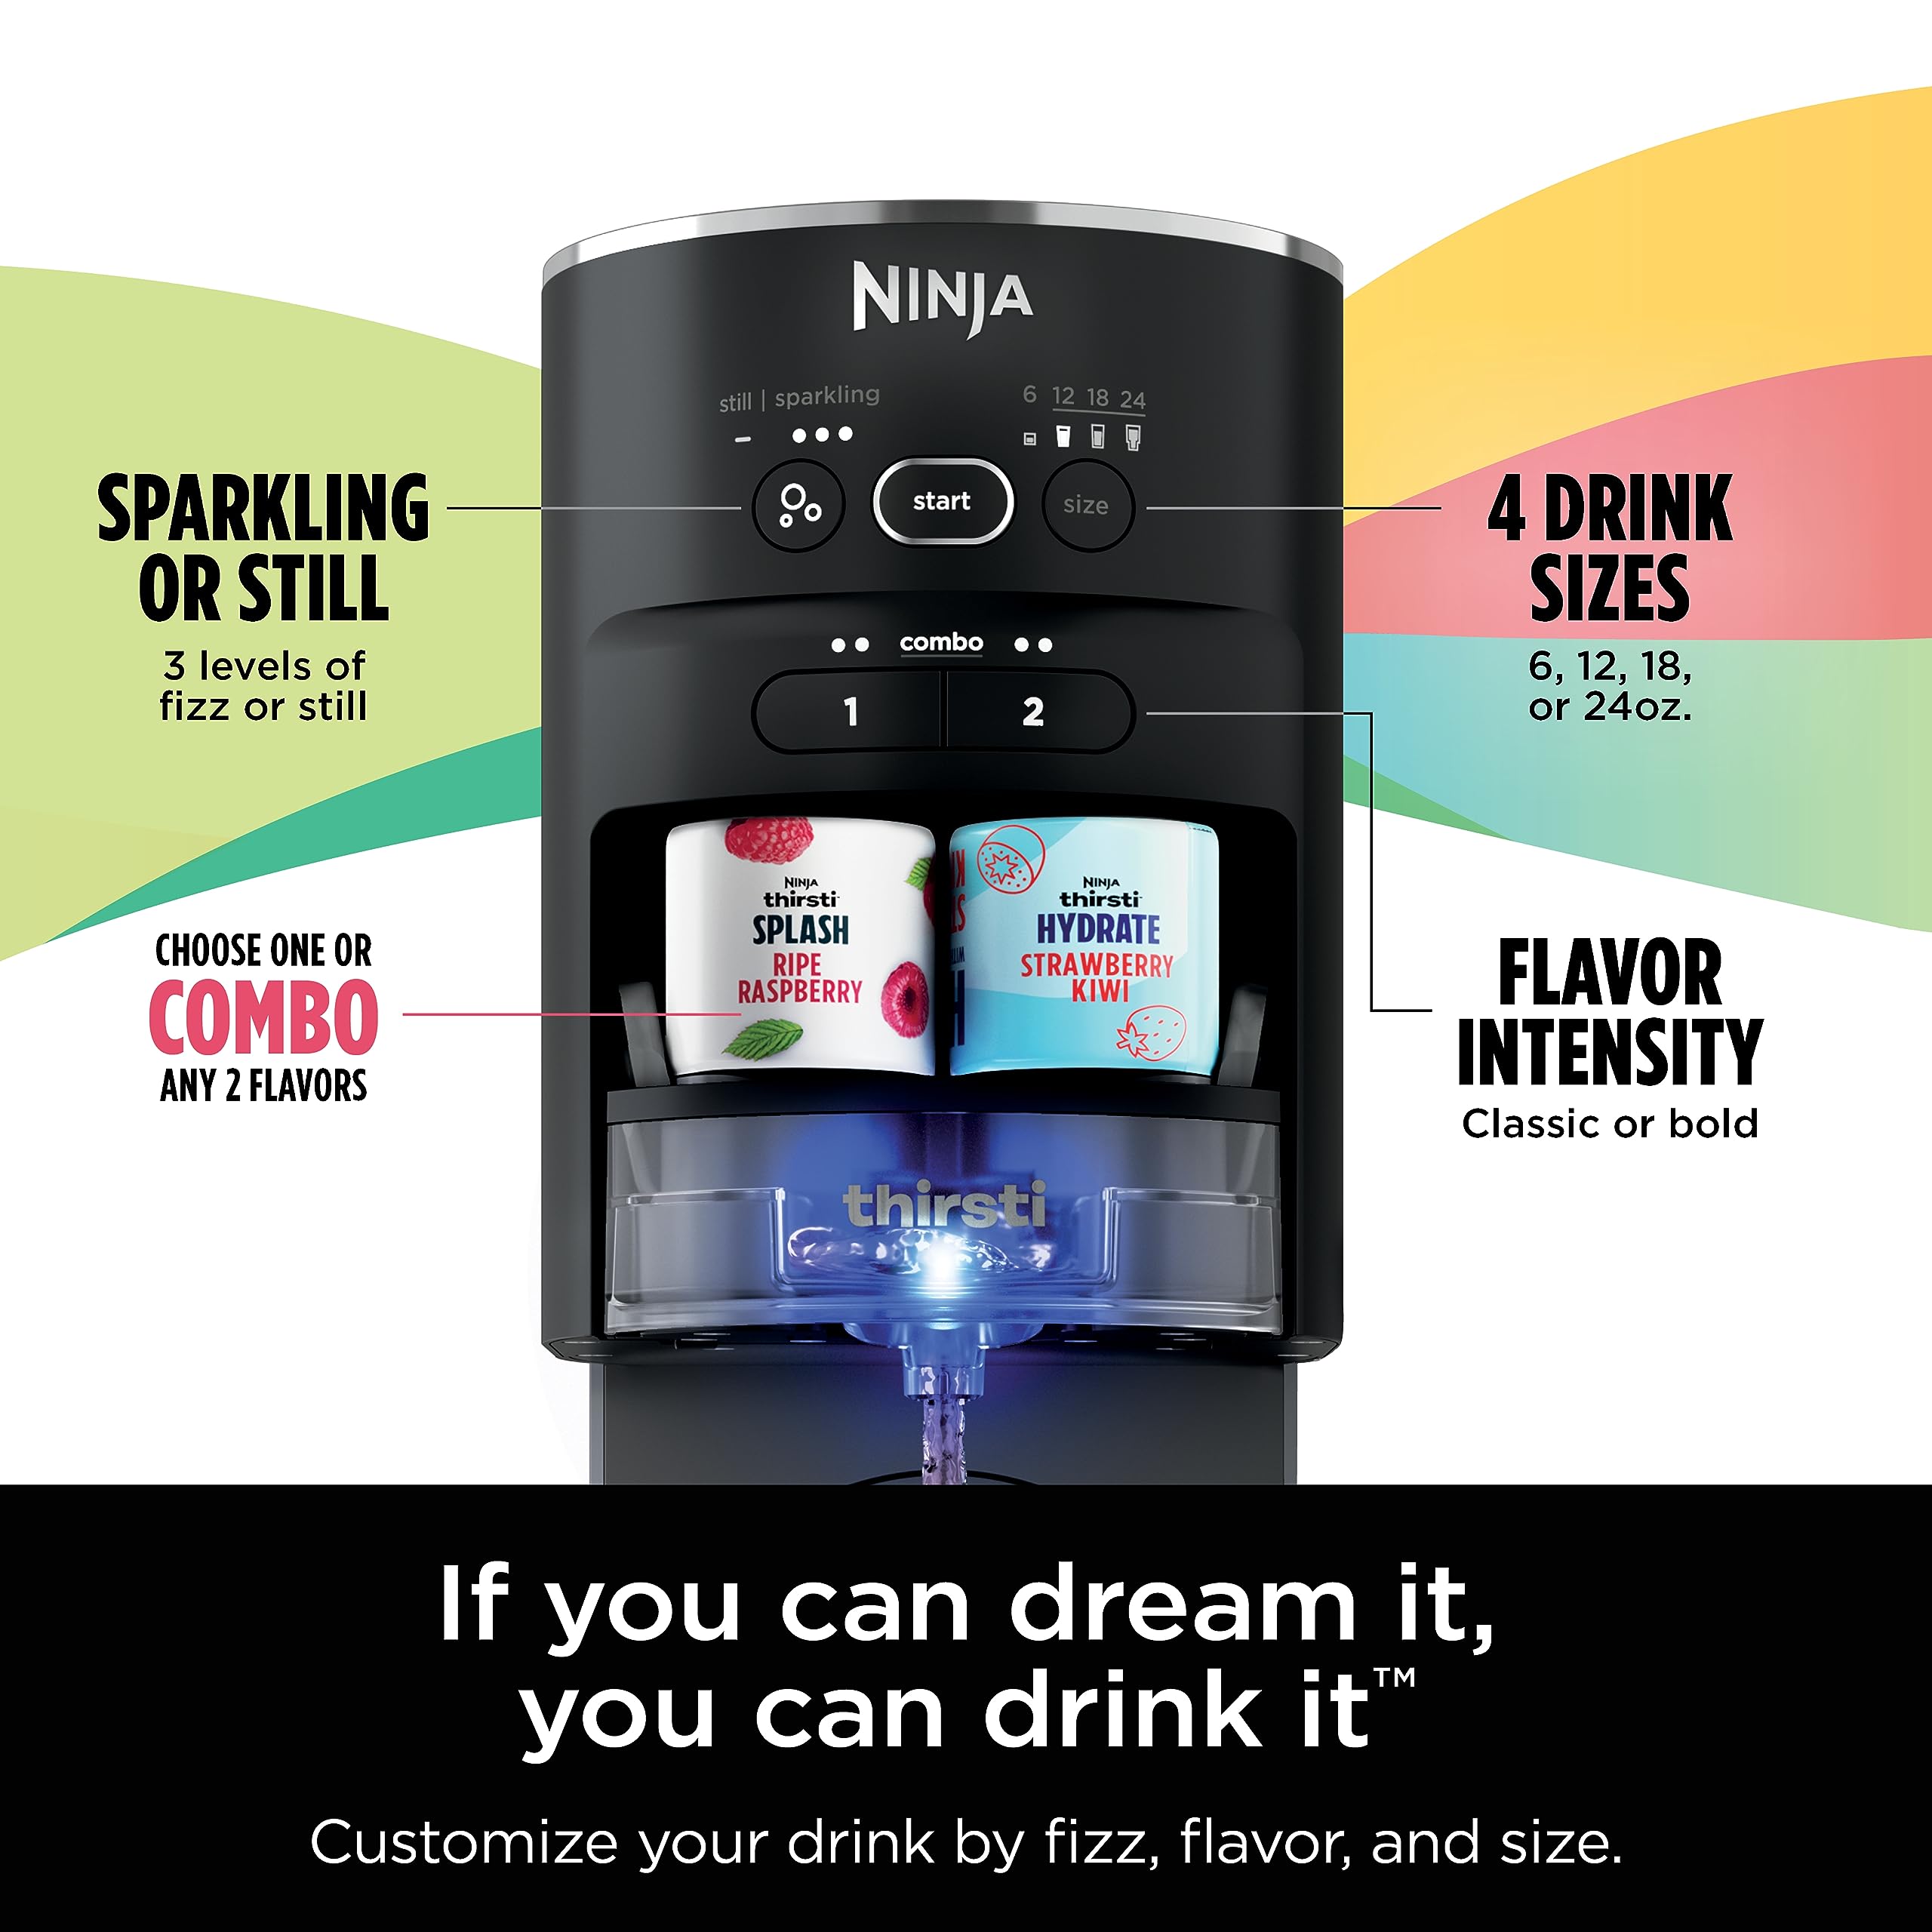 Ninja WC1001 Thirsti Drink System makes Sparkling & Still Water, 6 24-oz Sizes, Includes 60L CO2 Cylinder & 8 Flavored Water Drops, Black